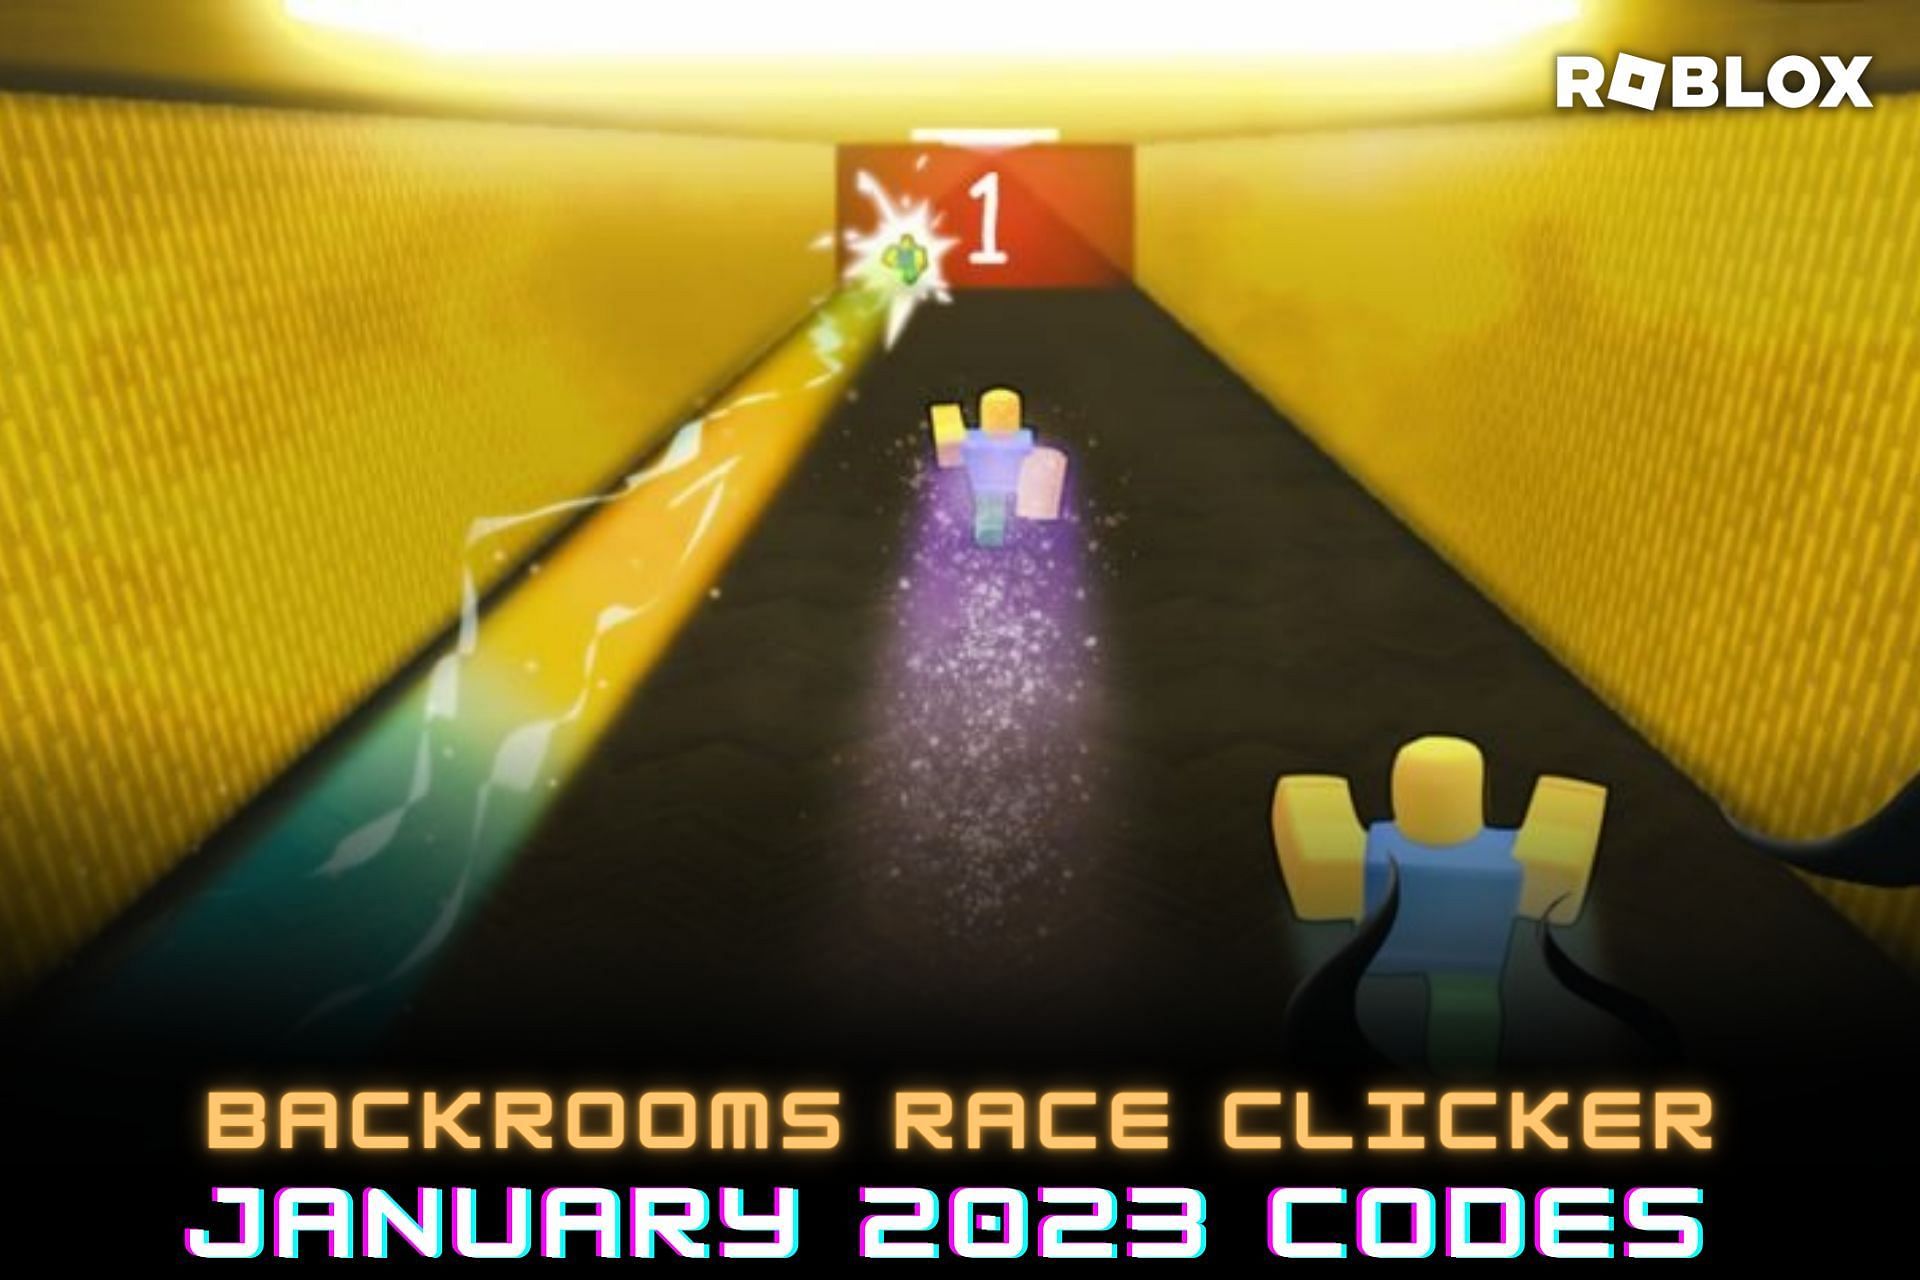 ALL NEW WORKING CODES FOR RACE CLICKER 2022! ROBLOX RACE CLICKER CODES 